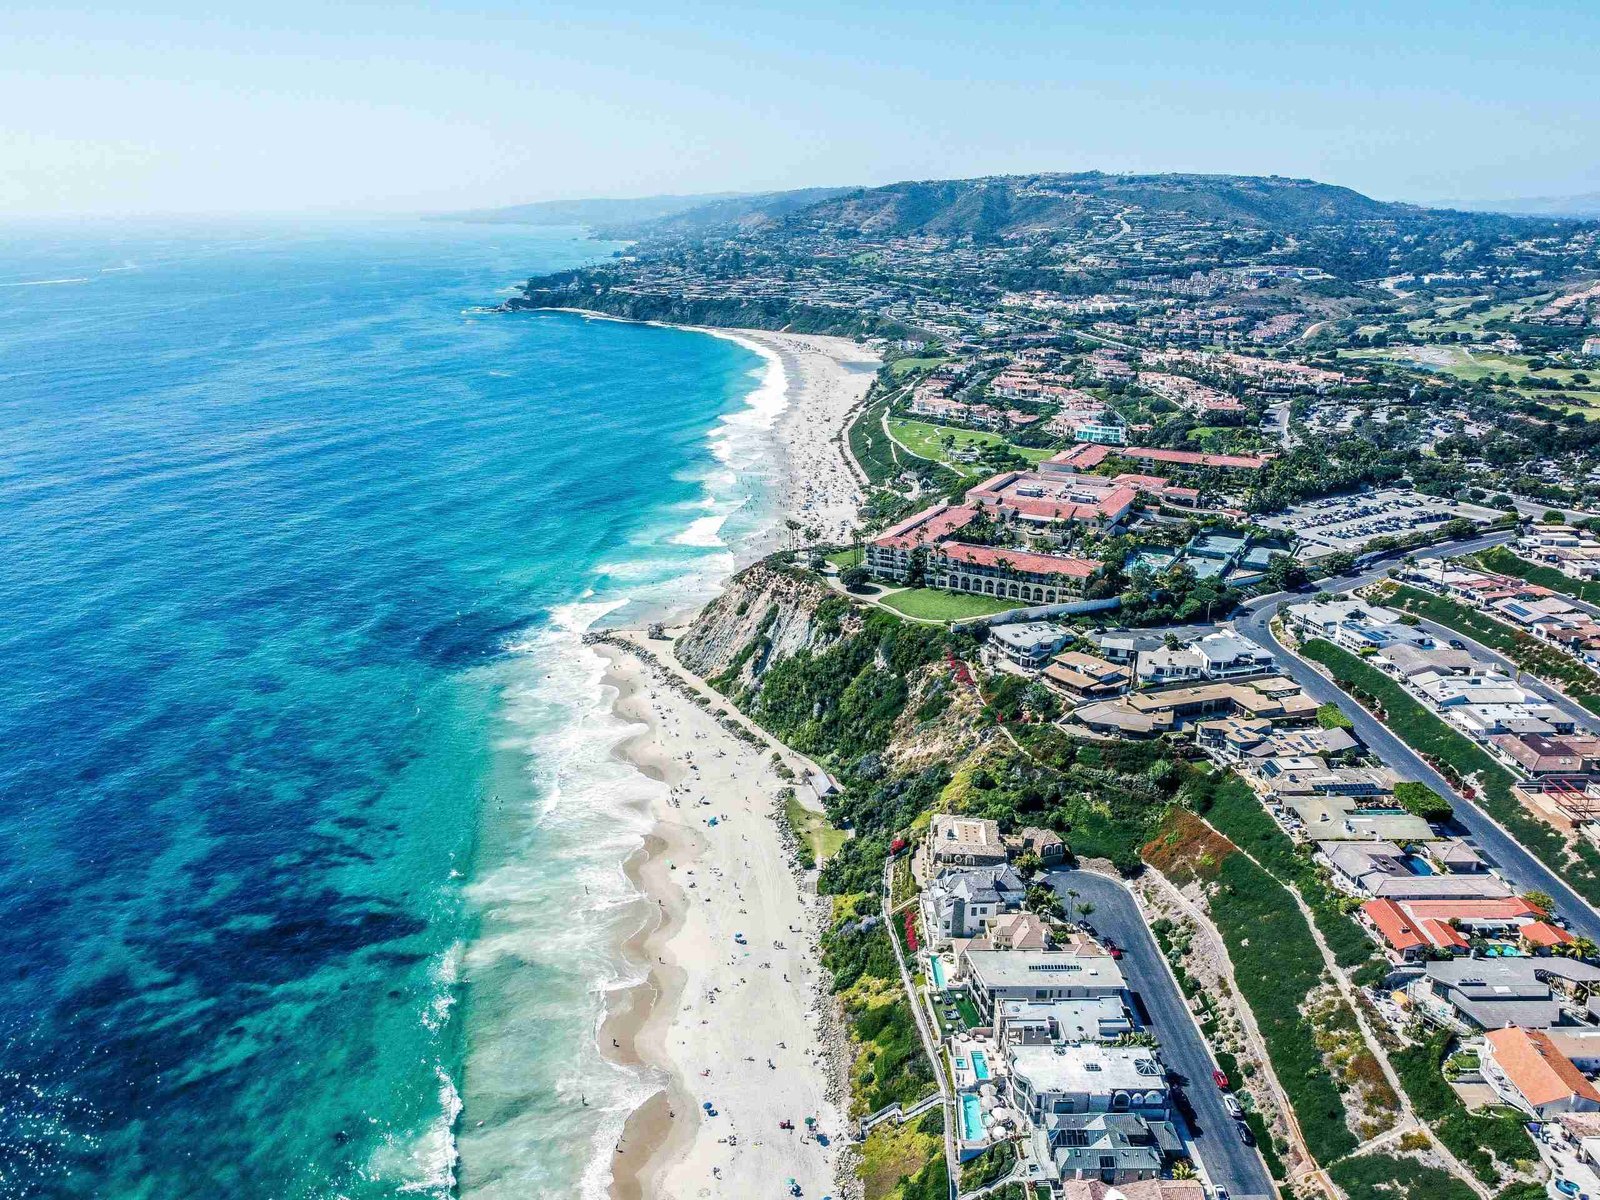 Aerial shot of Orange County with the beach on one side and the city on the other.